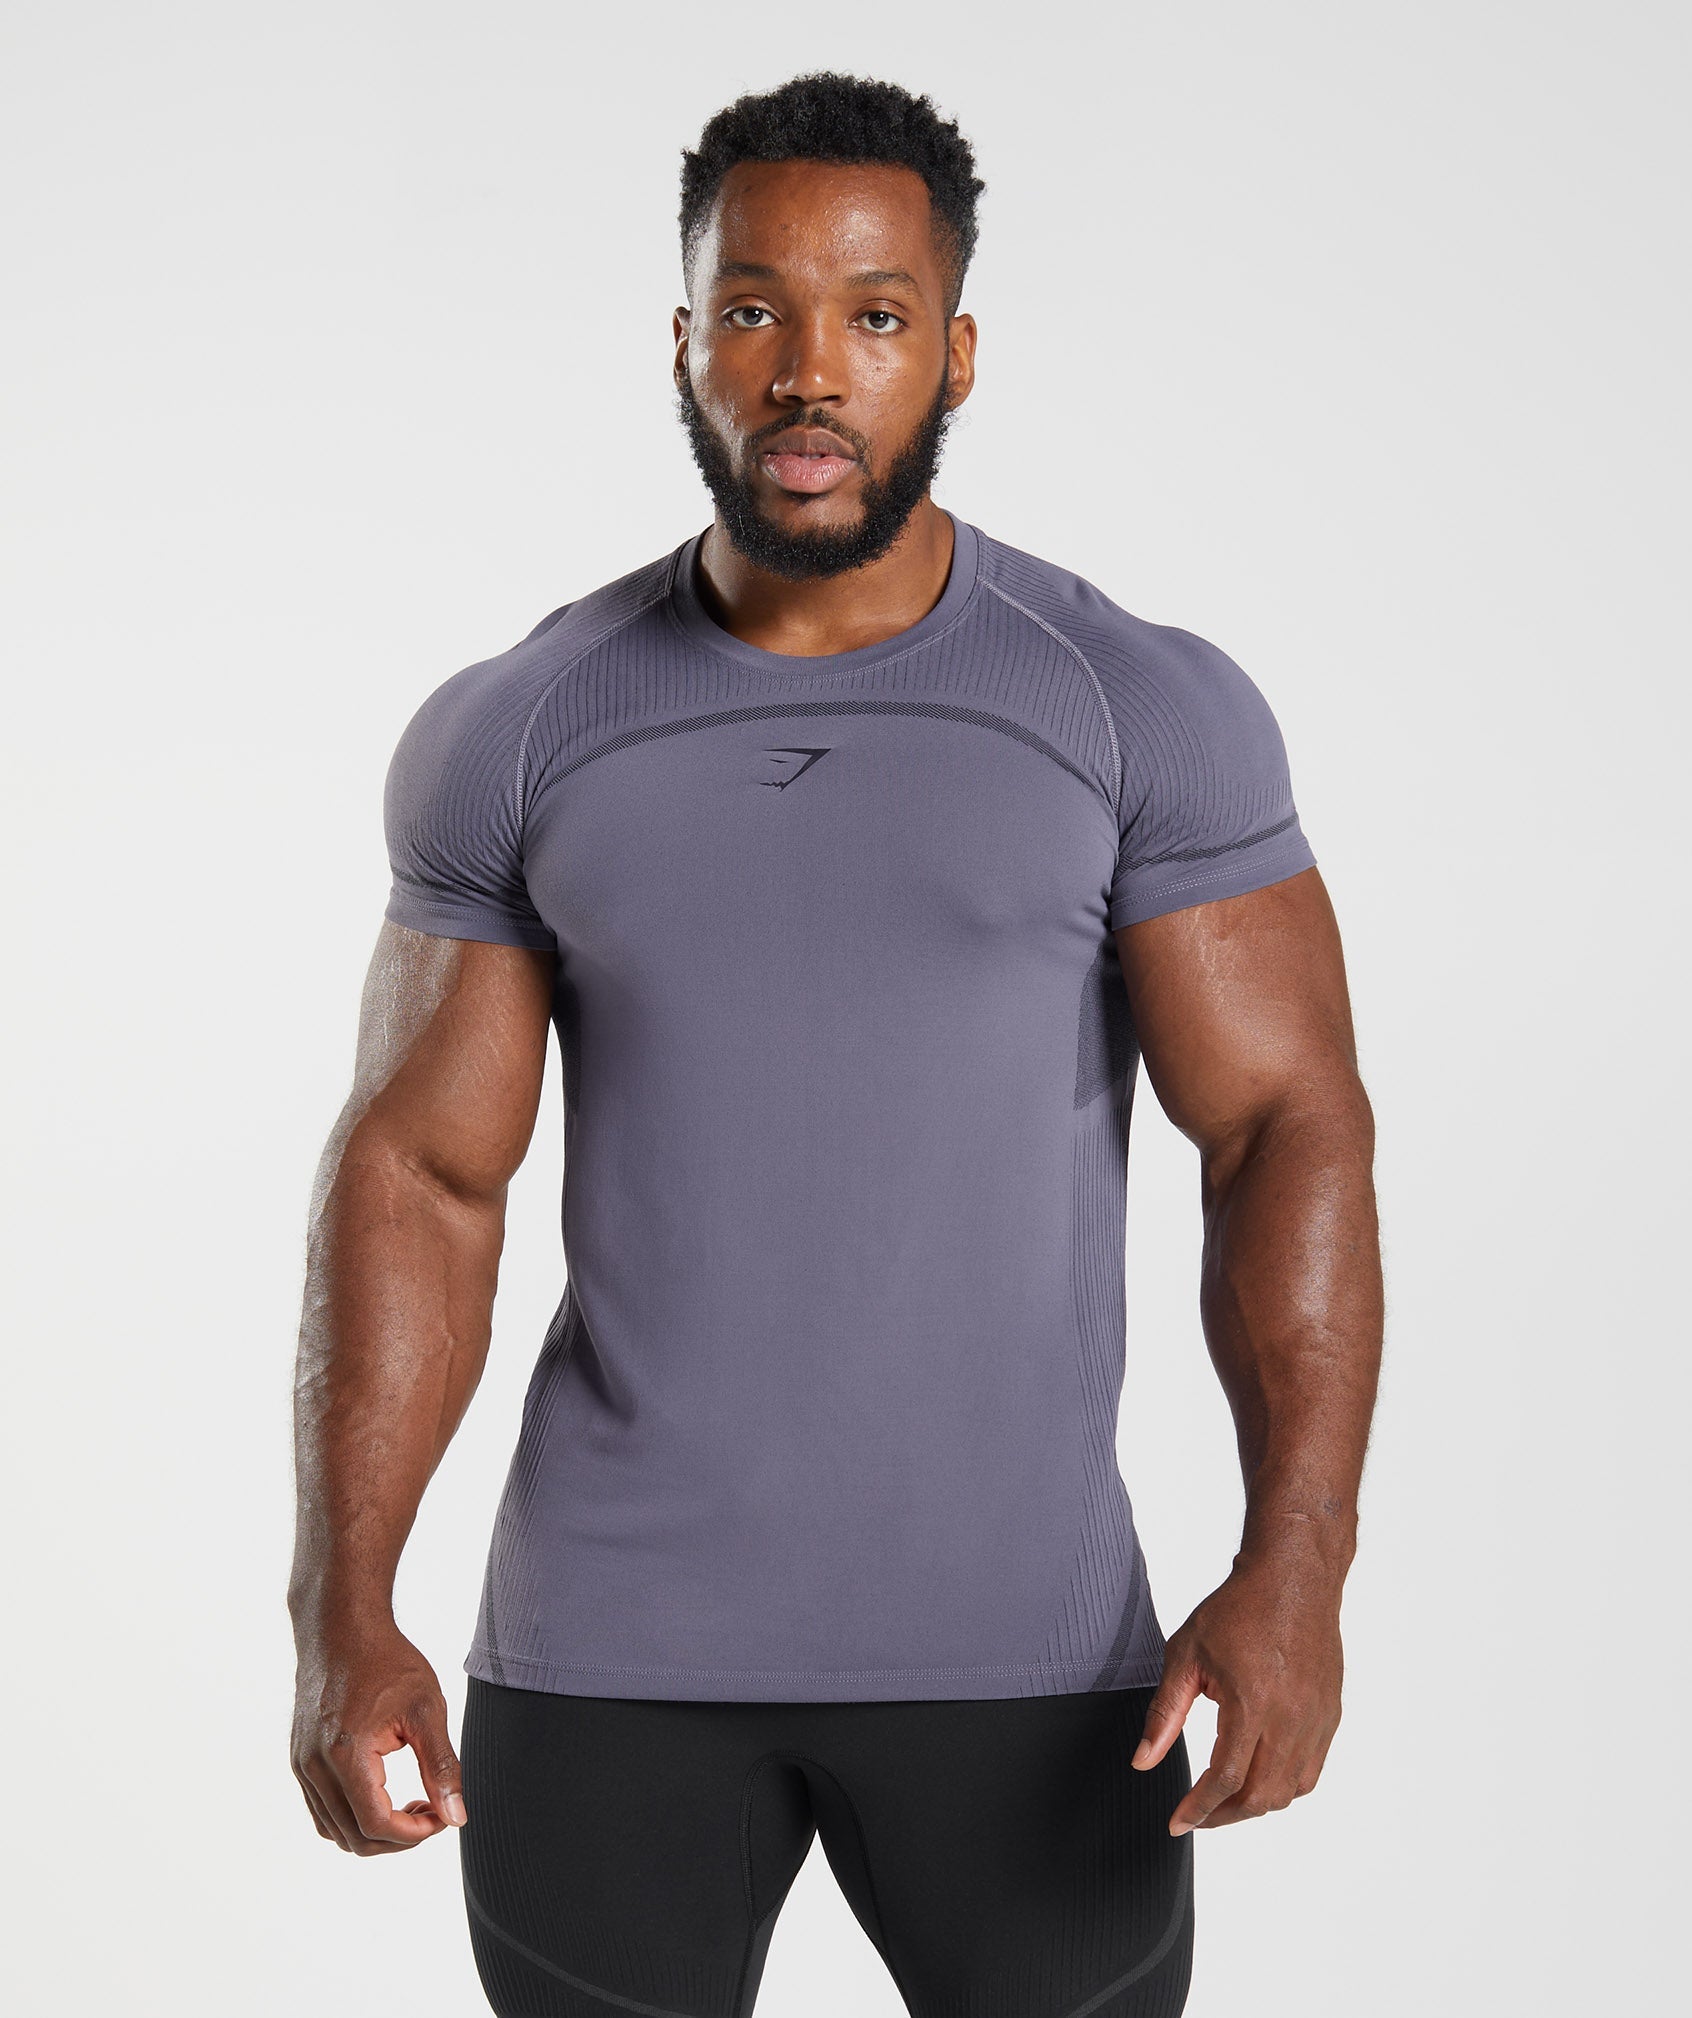 Anyone selling the gymshark onyx collection black tshirts in a small? : r/ Gymshark